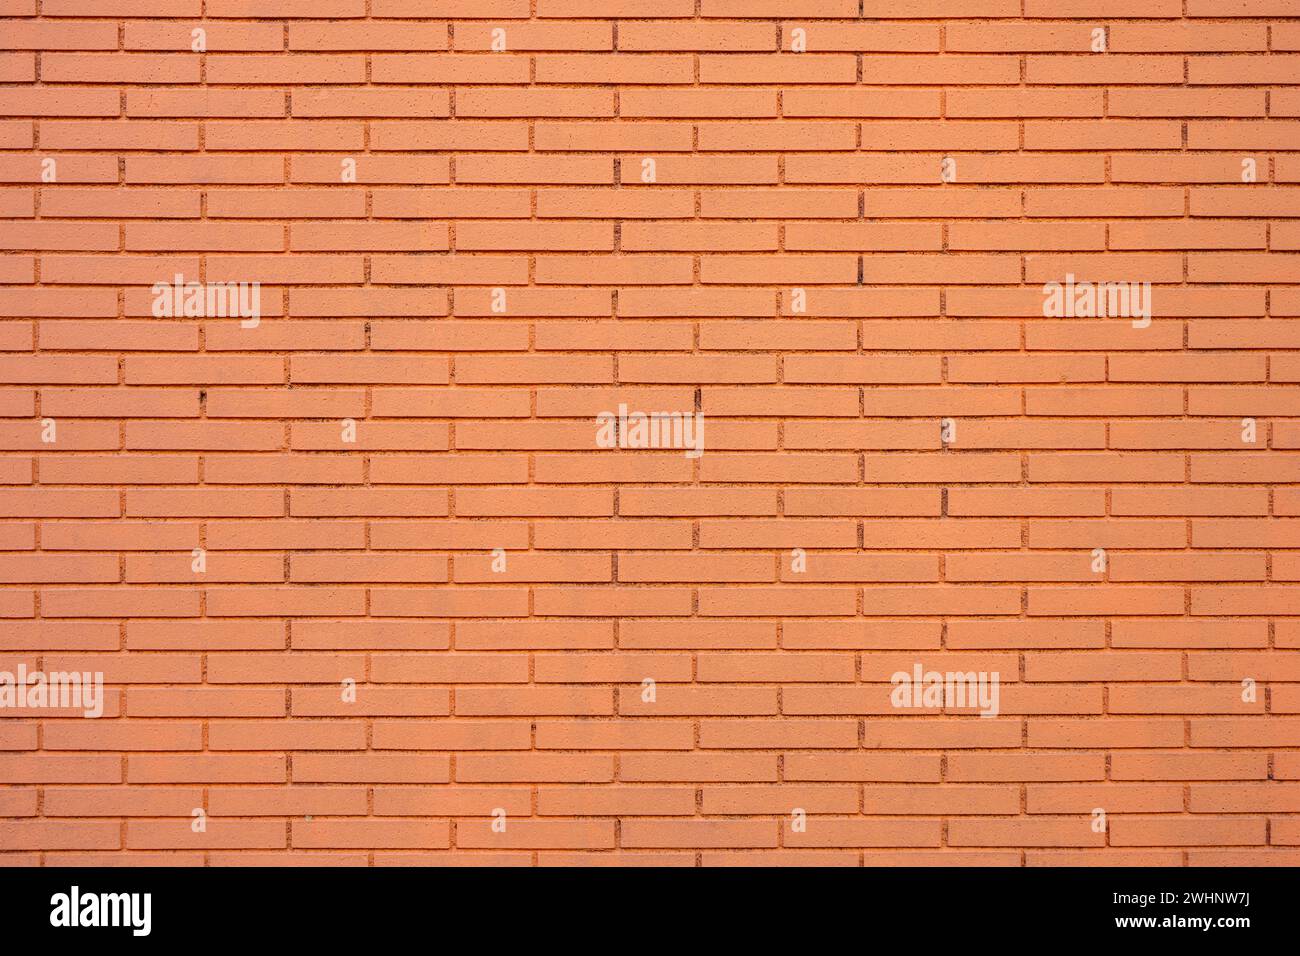 Background from a wall made of orange painted bricks Stock Photo